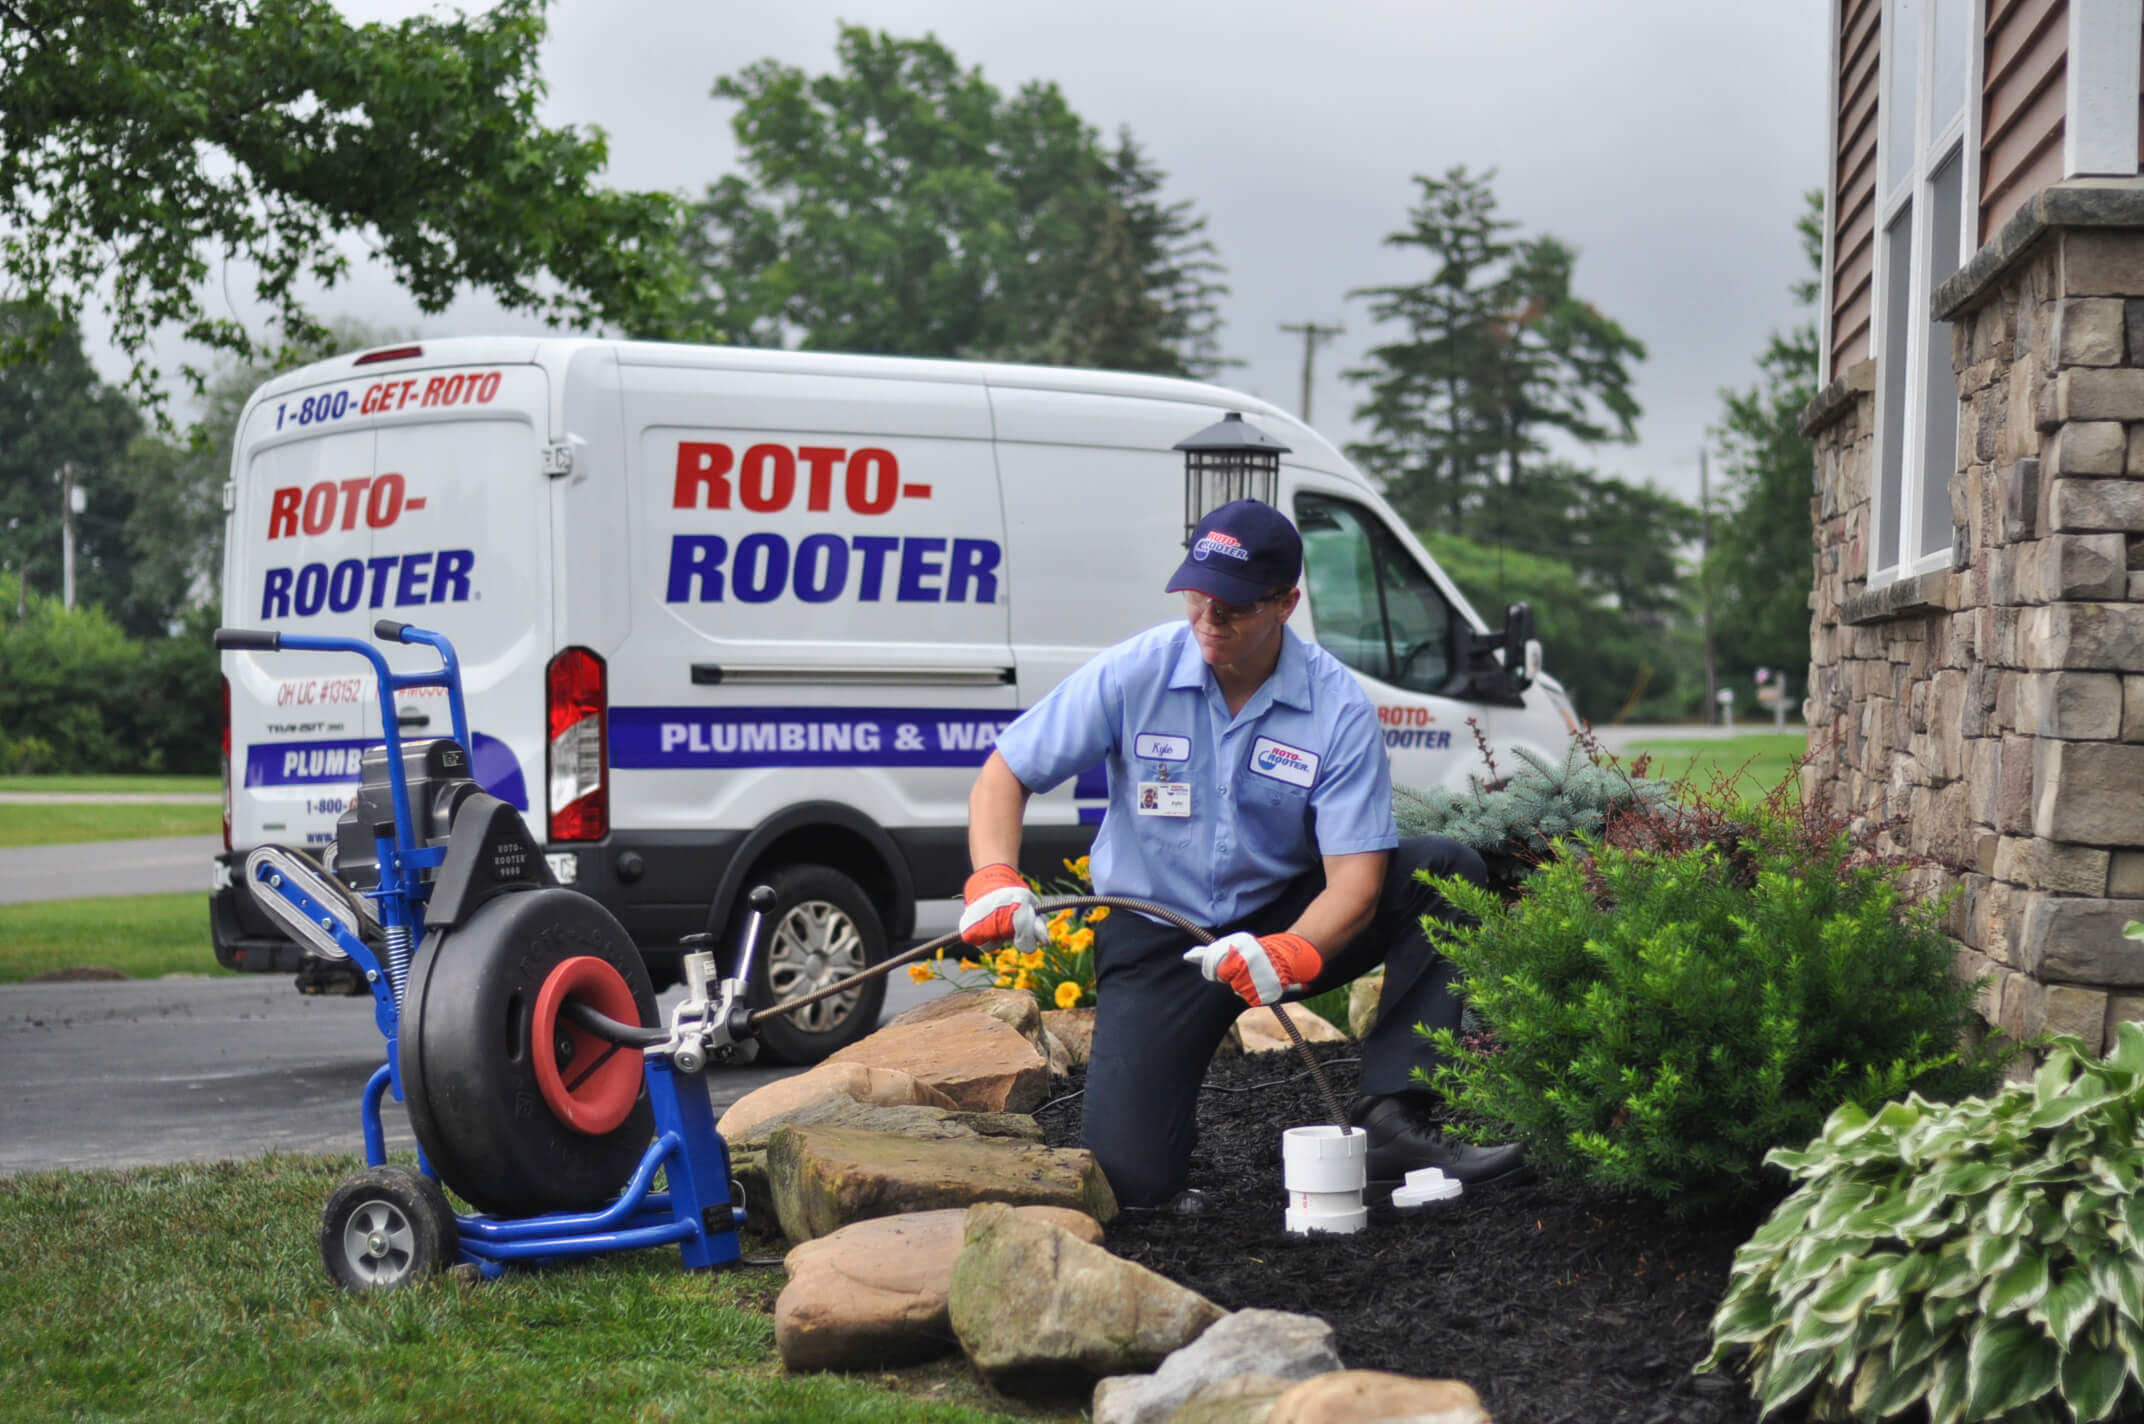 Plumber in customer's front yard using drain cleaning machine to perform sewer line cleaning